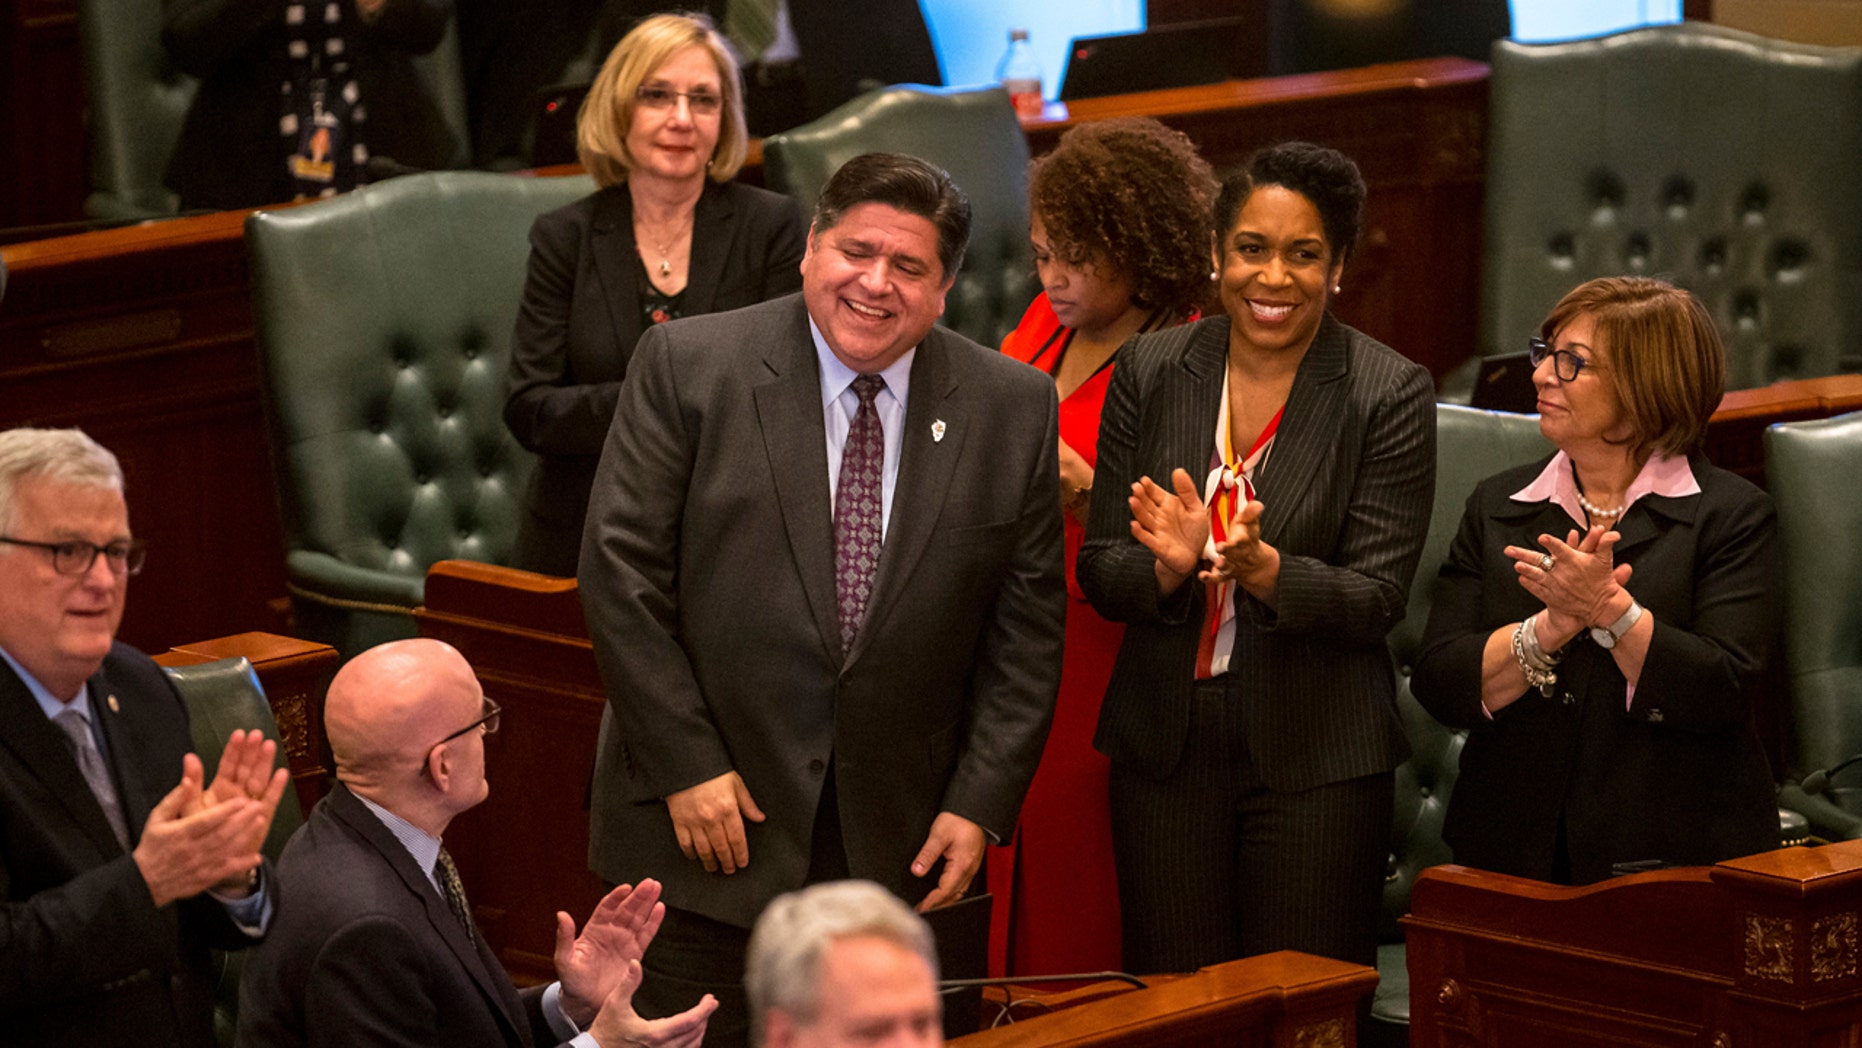 The governor of Illinois, JB Pritzker, left, and Illinois lieutenant-governor, Juliana Stratton, right, are recognized in the Capitol House of Illinois on Thursday 14 February 2019, in Springfield, Illinois. Illinois lawmakers reacted quickly. One of Pritzker's best campaign promises, a gradual increase in the statewide minimum wage from $ 8.25 to $ 15 an hour, is more than double the base salary required by most of its Midwestern neighbors. (Justin L. Fowler / The State Journal-Register via AP)